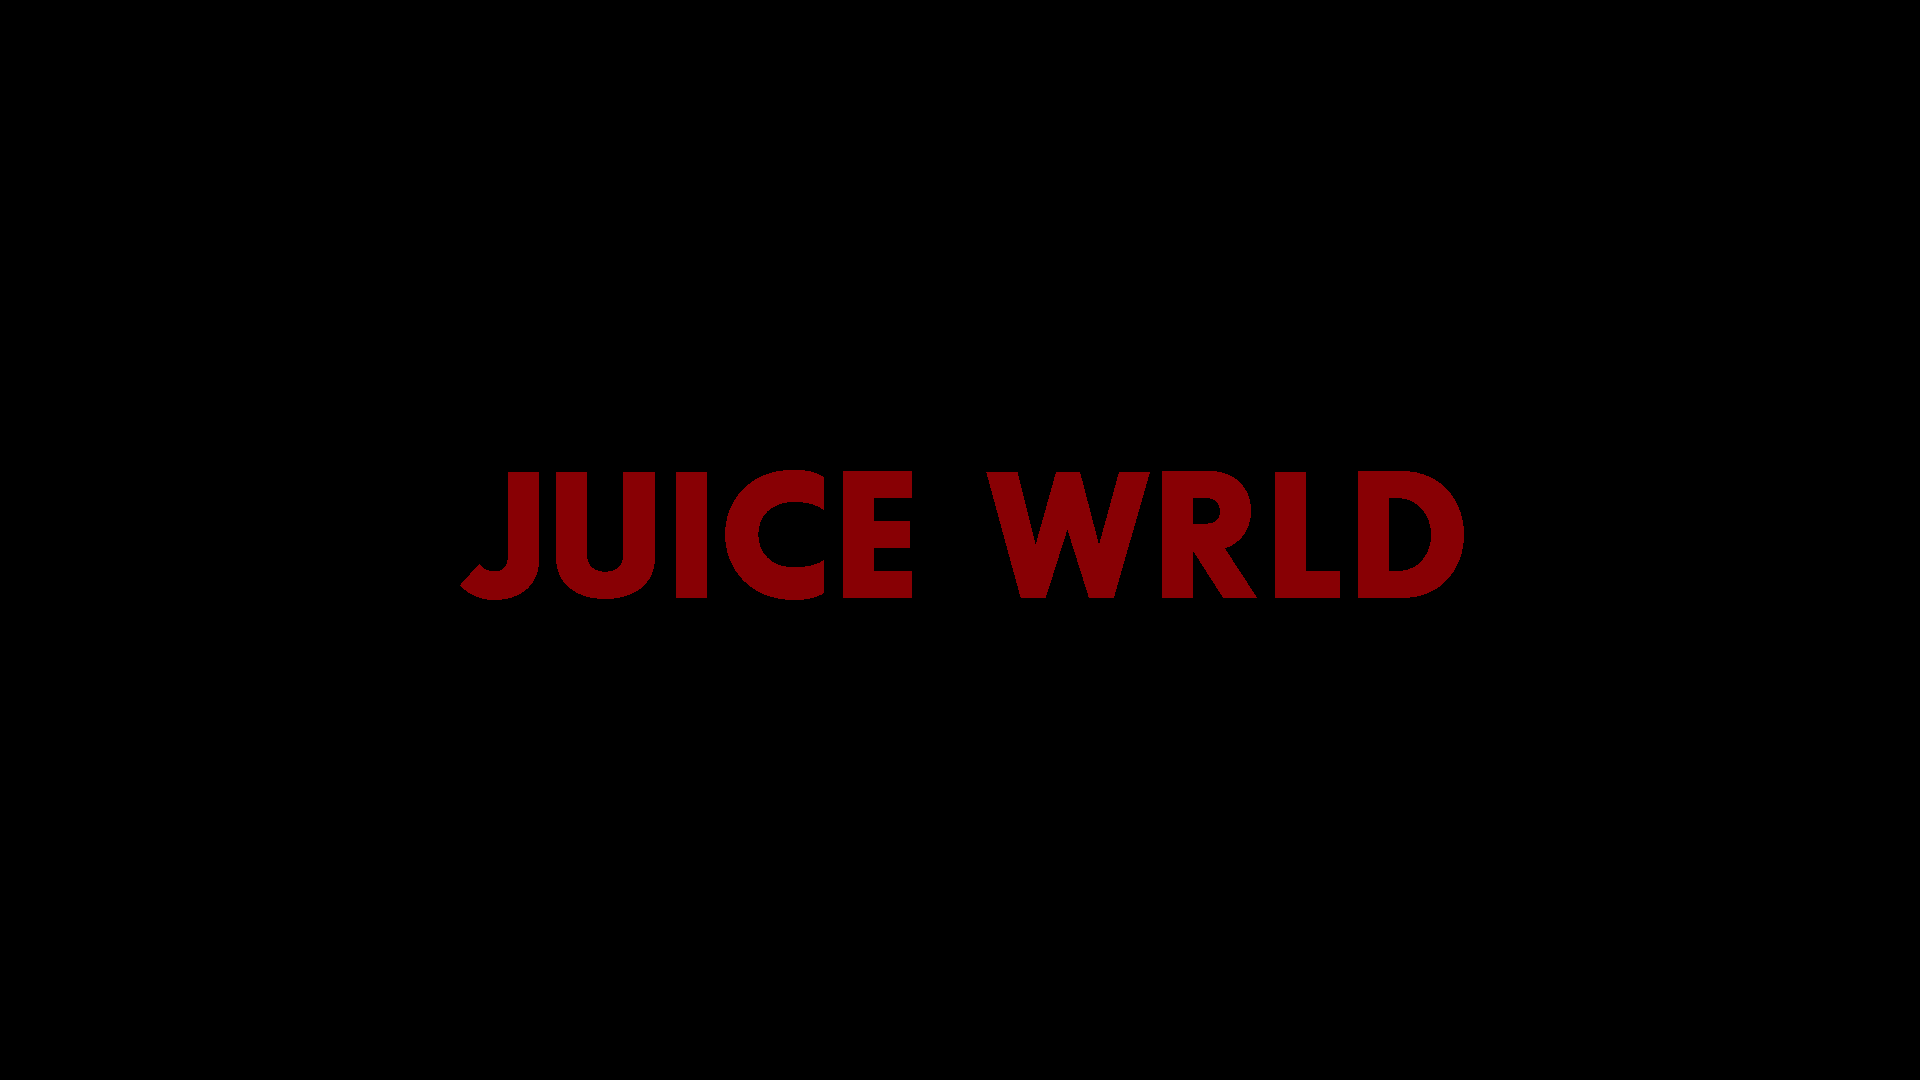 Juice World Wallpapers Top Free Juice World Backgrounds Wallpaperaccess